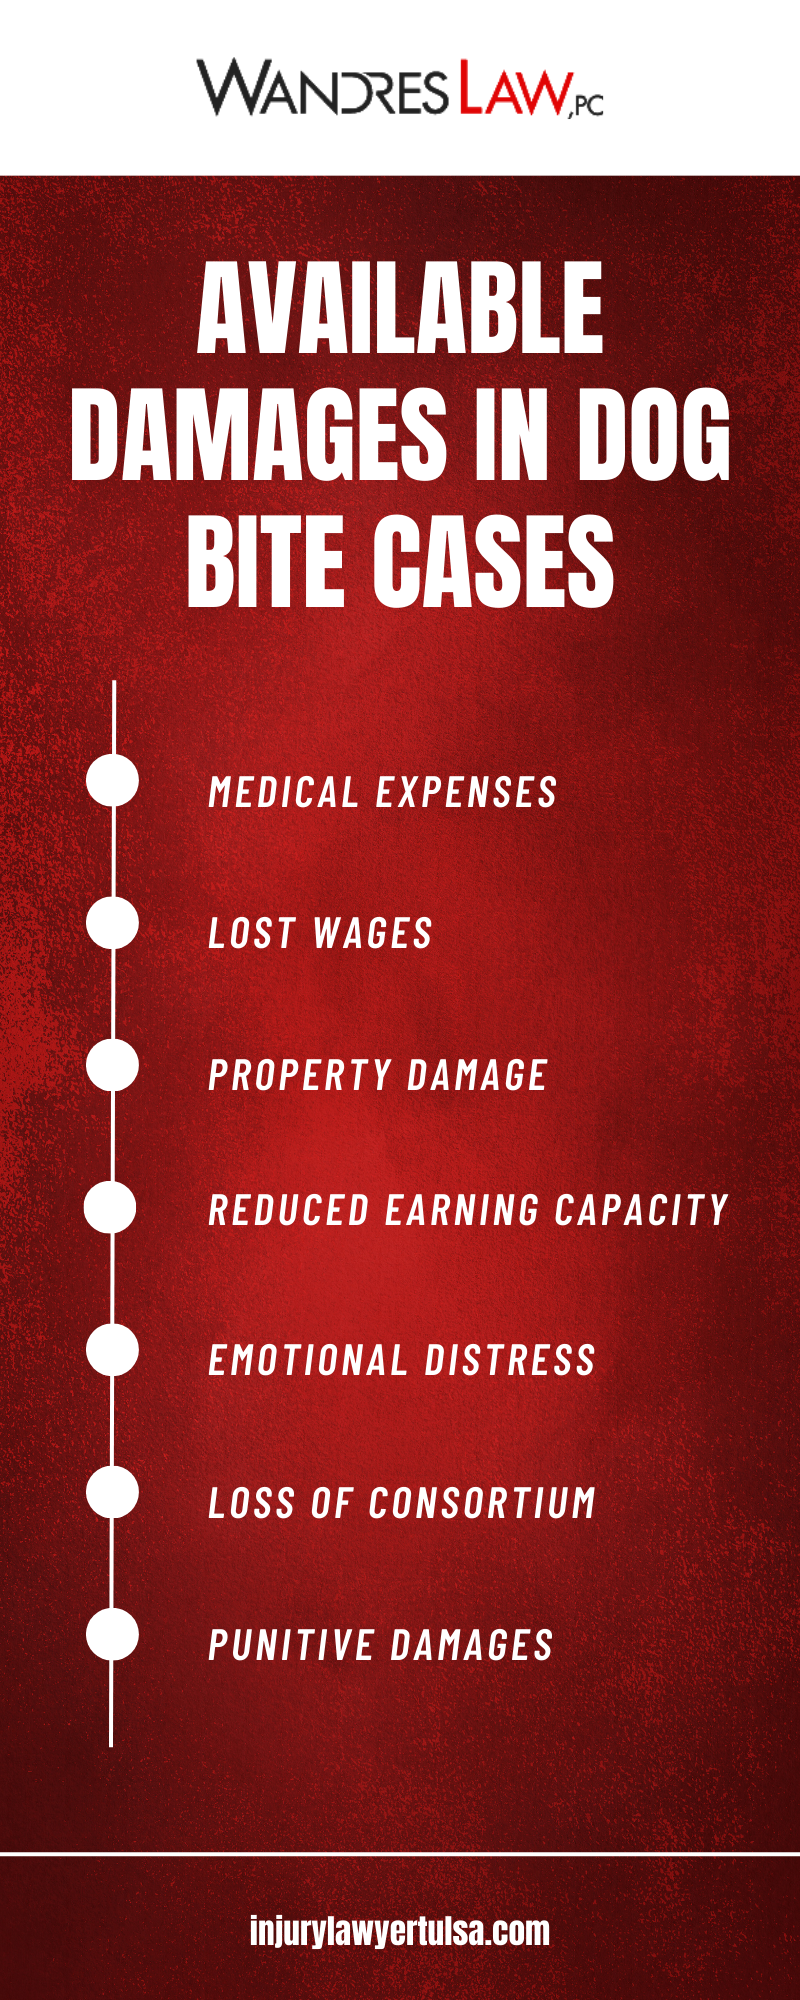 AVAILABLE DAMAGES IN DOG BITE CASES INFOGRAPHIC